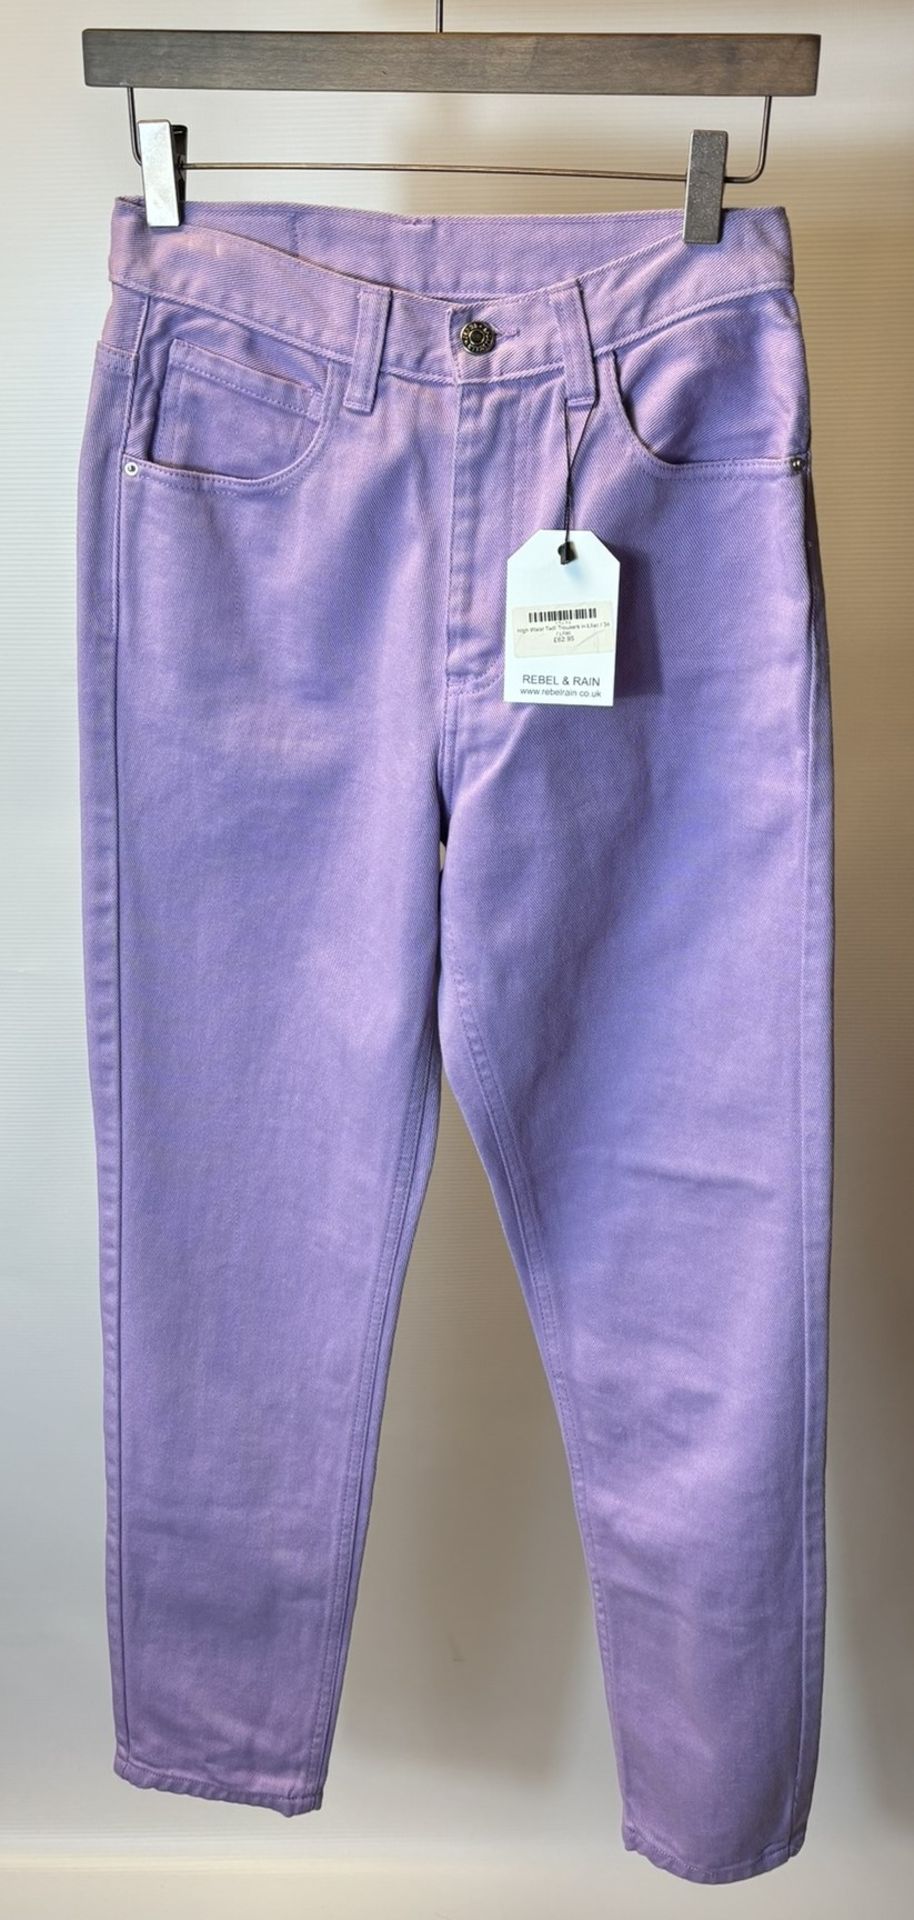 12 x Various Pairs Of Women's Trousers/Jeans As Seen In Photos - Image 13 of 36